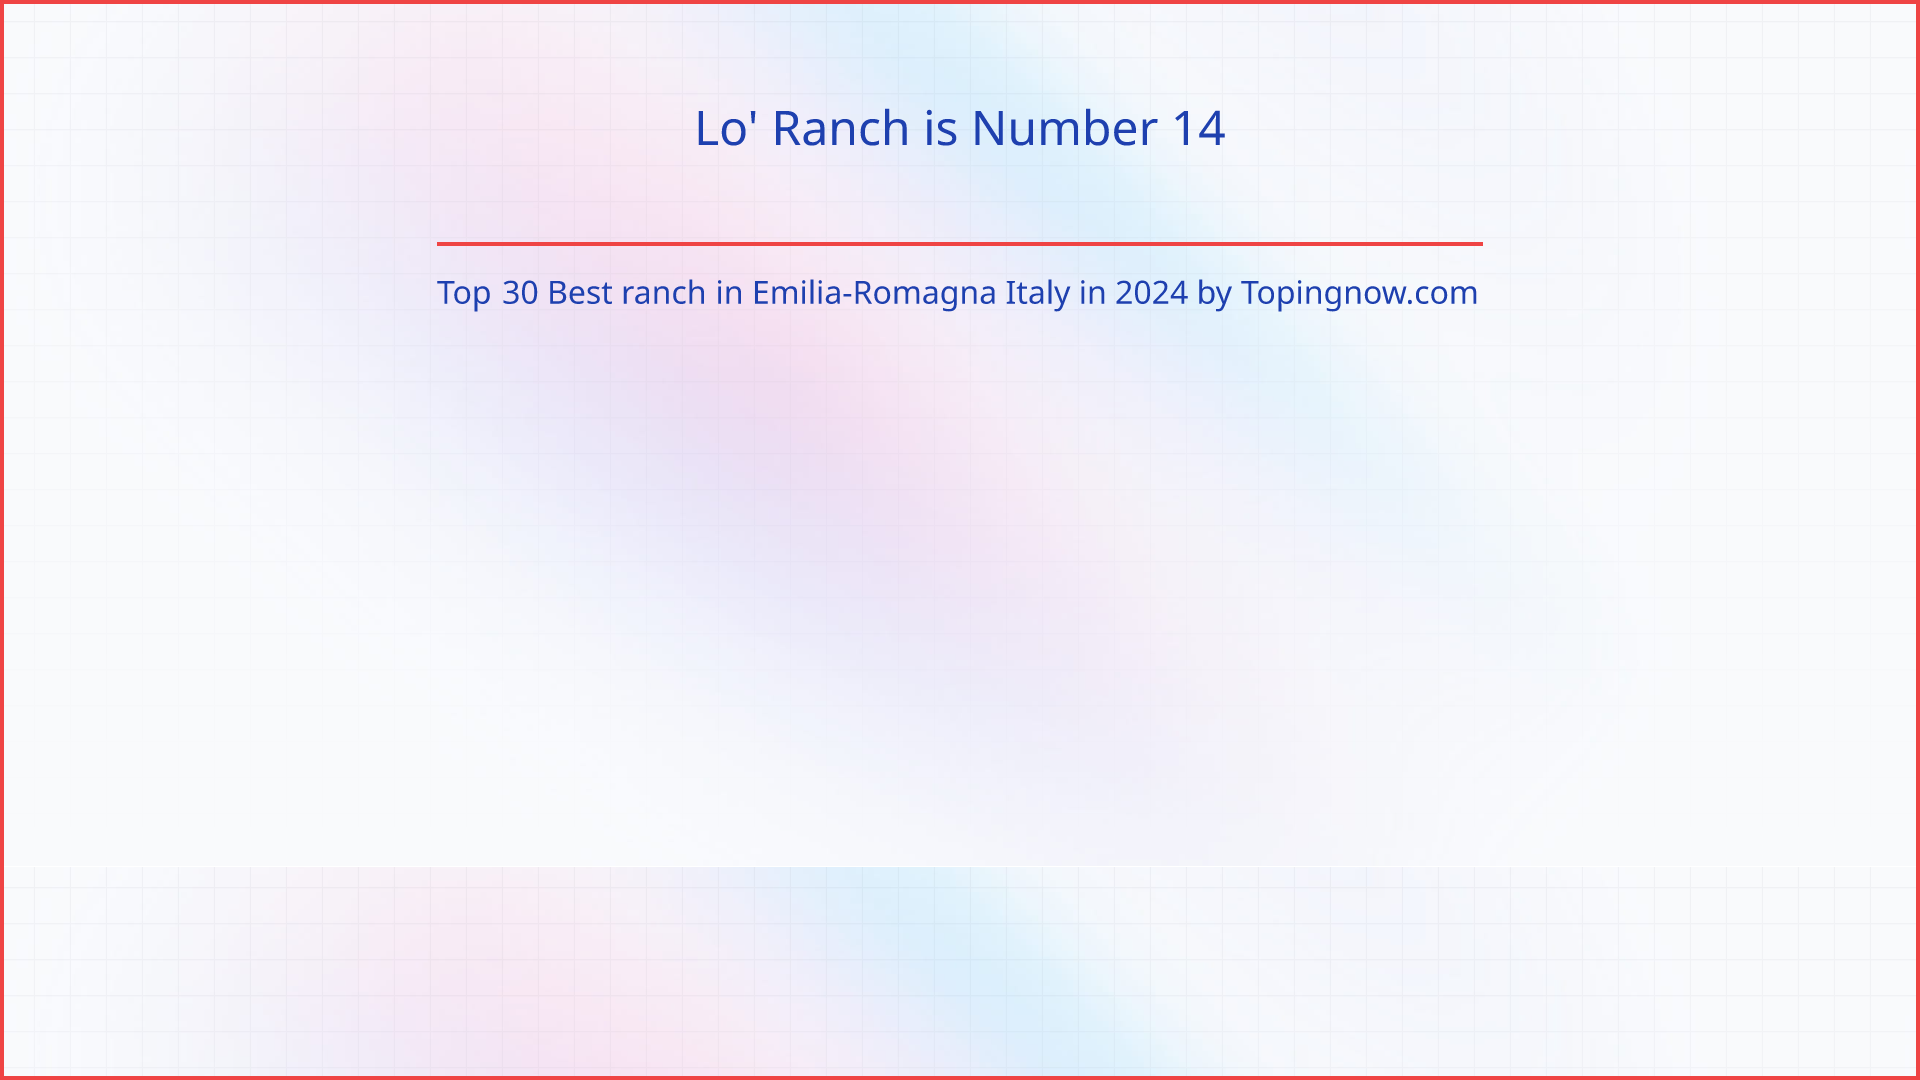 Lo' Ranch: Top 30 Best ranch in Emilia-Romagna Italy in 2024